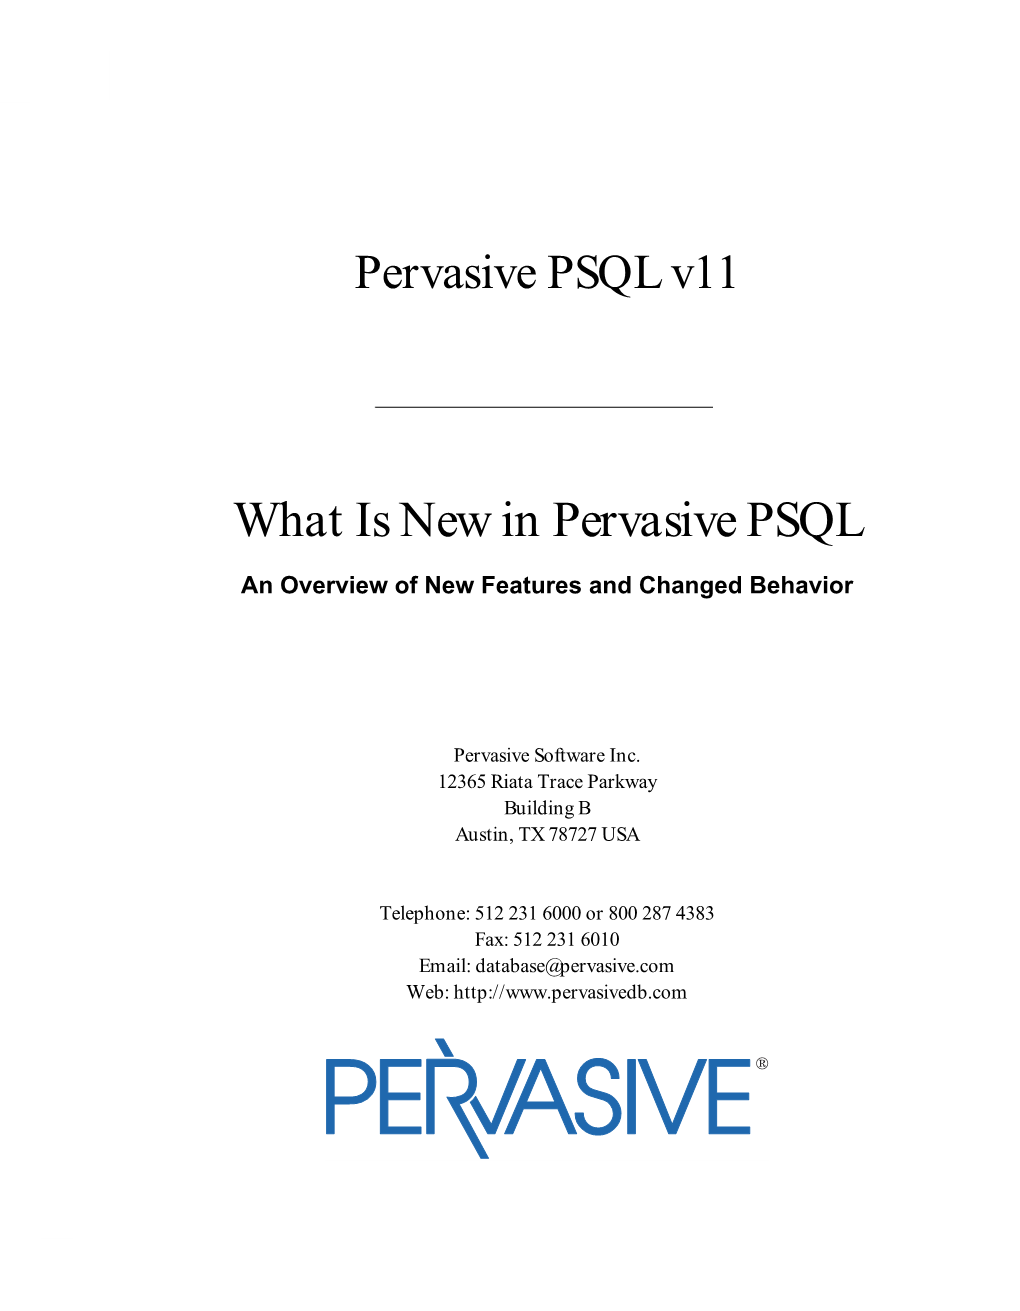 What Is New in Pervasive PSQL